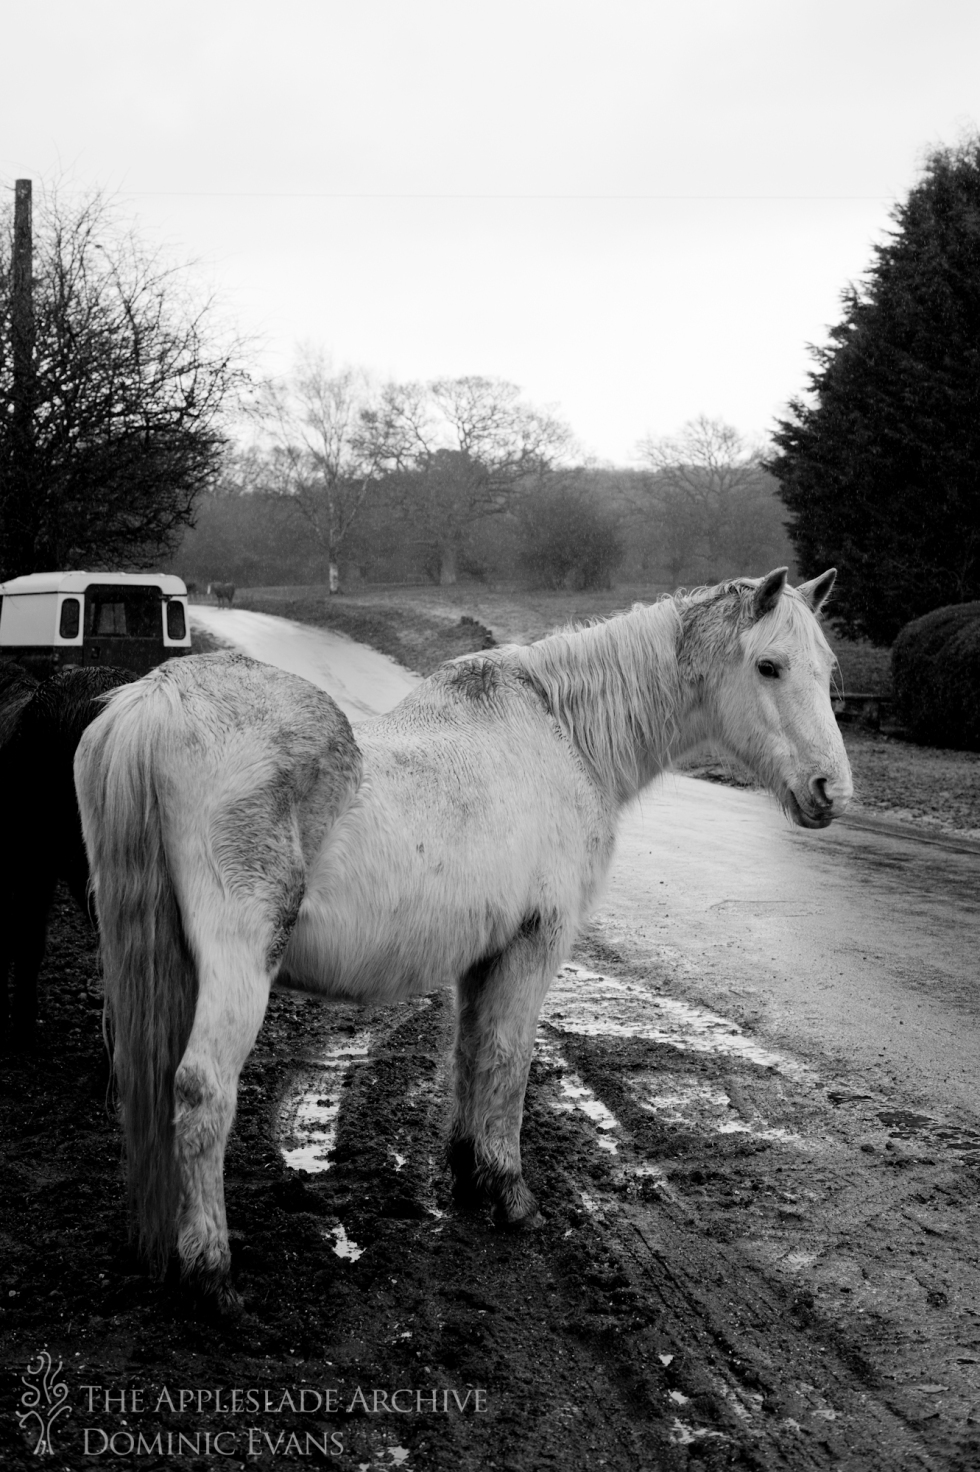 A New Forest Pony, Linwood, New Forest, Hampshire, 18th March 2013